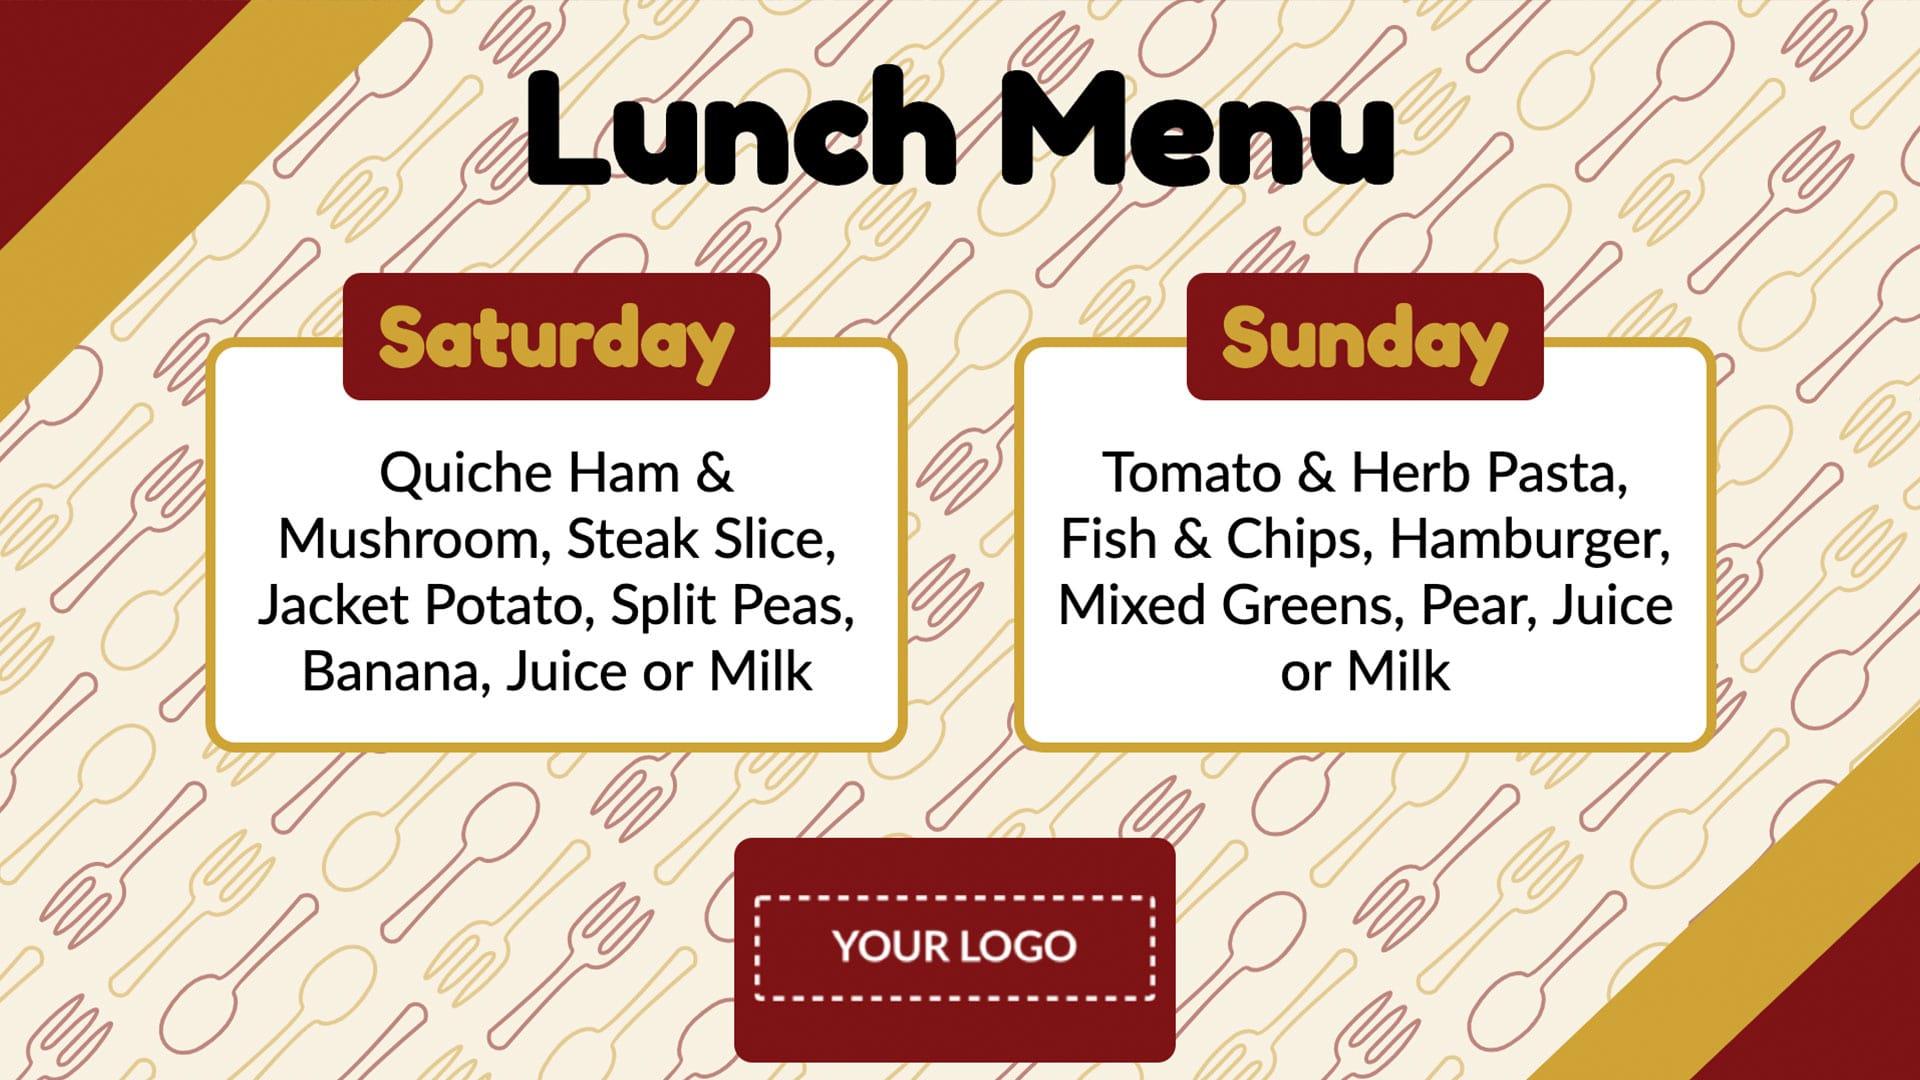 Two-Day Lunch Menu Digital Signage Template